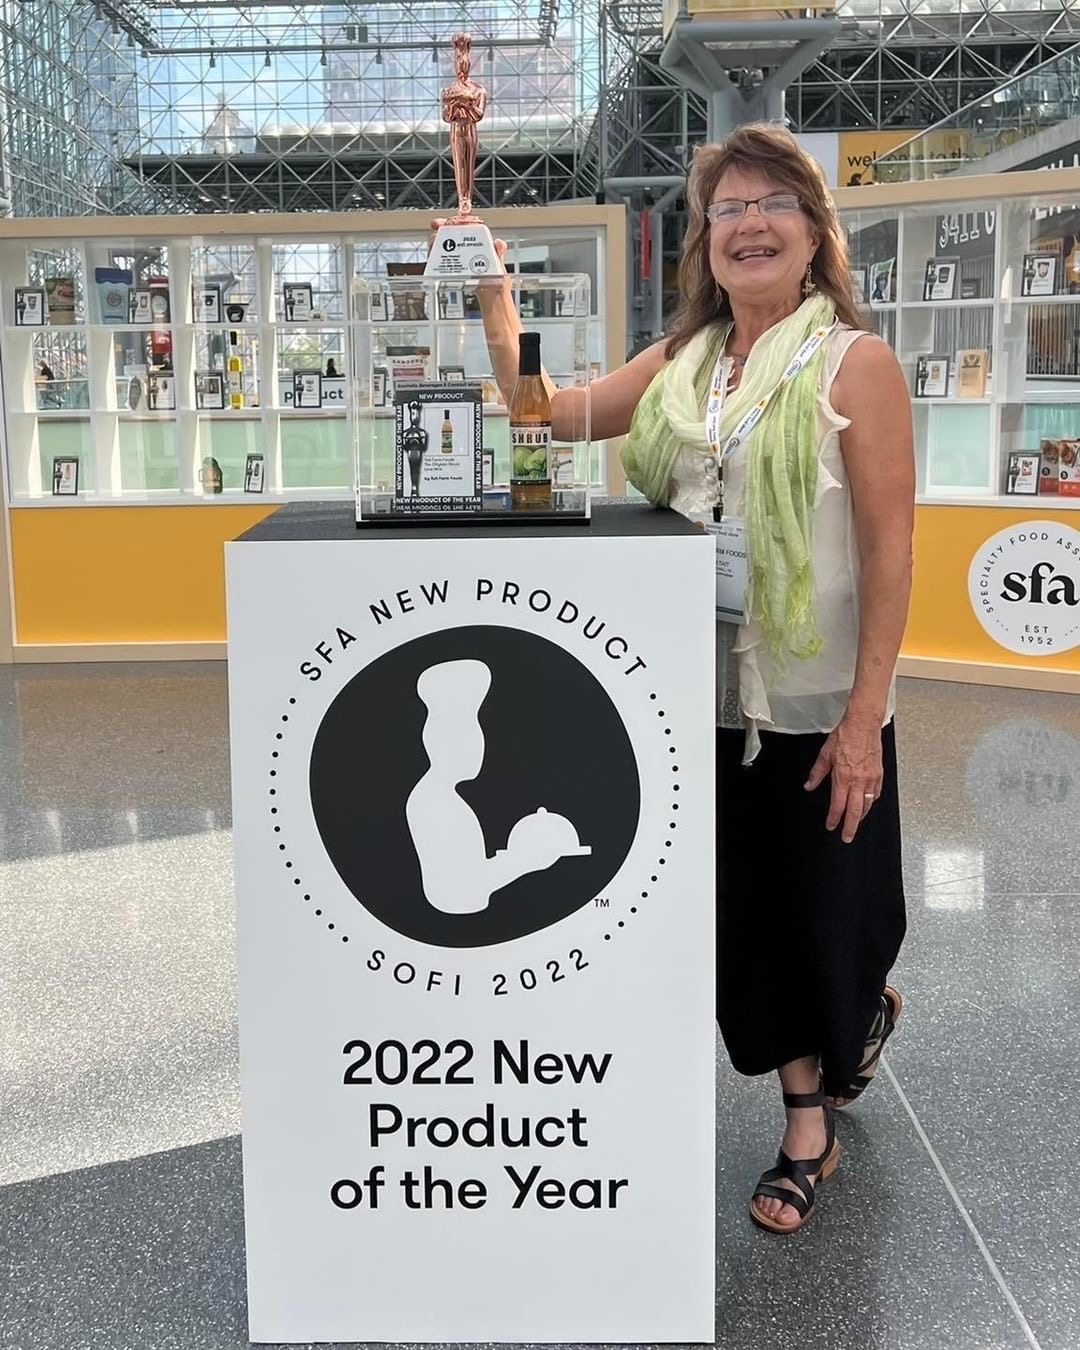 Congratulations to @taitfarmfoods!
Their Lime Mint Shrub won the SOFI Award for best new product in cocktail mixes, and now it’s been elevated to best OVERALL new product winner at the International Fancy Food Show! 